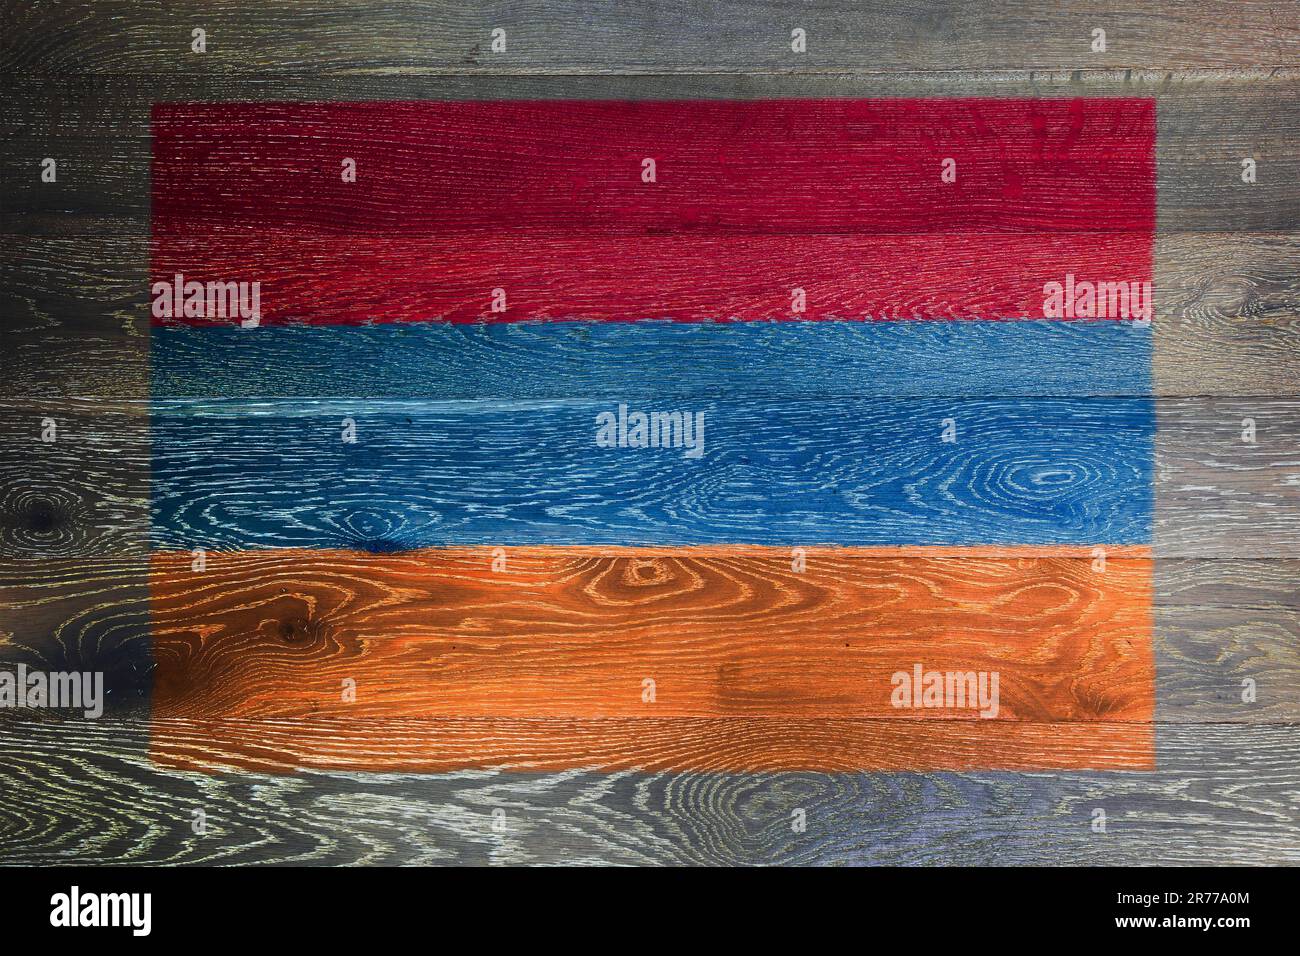 Armenia flag on rustic old wood surface background Stock Photo